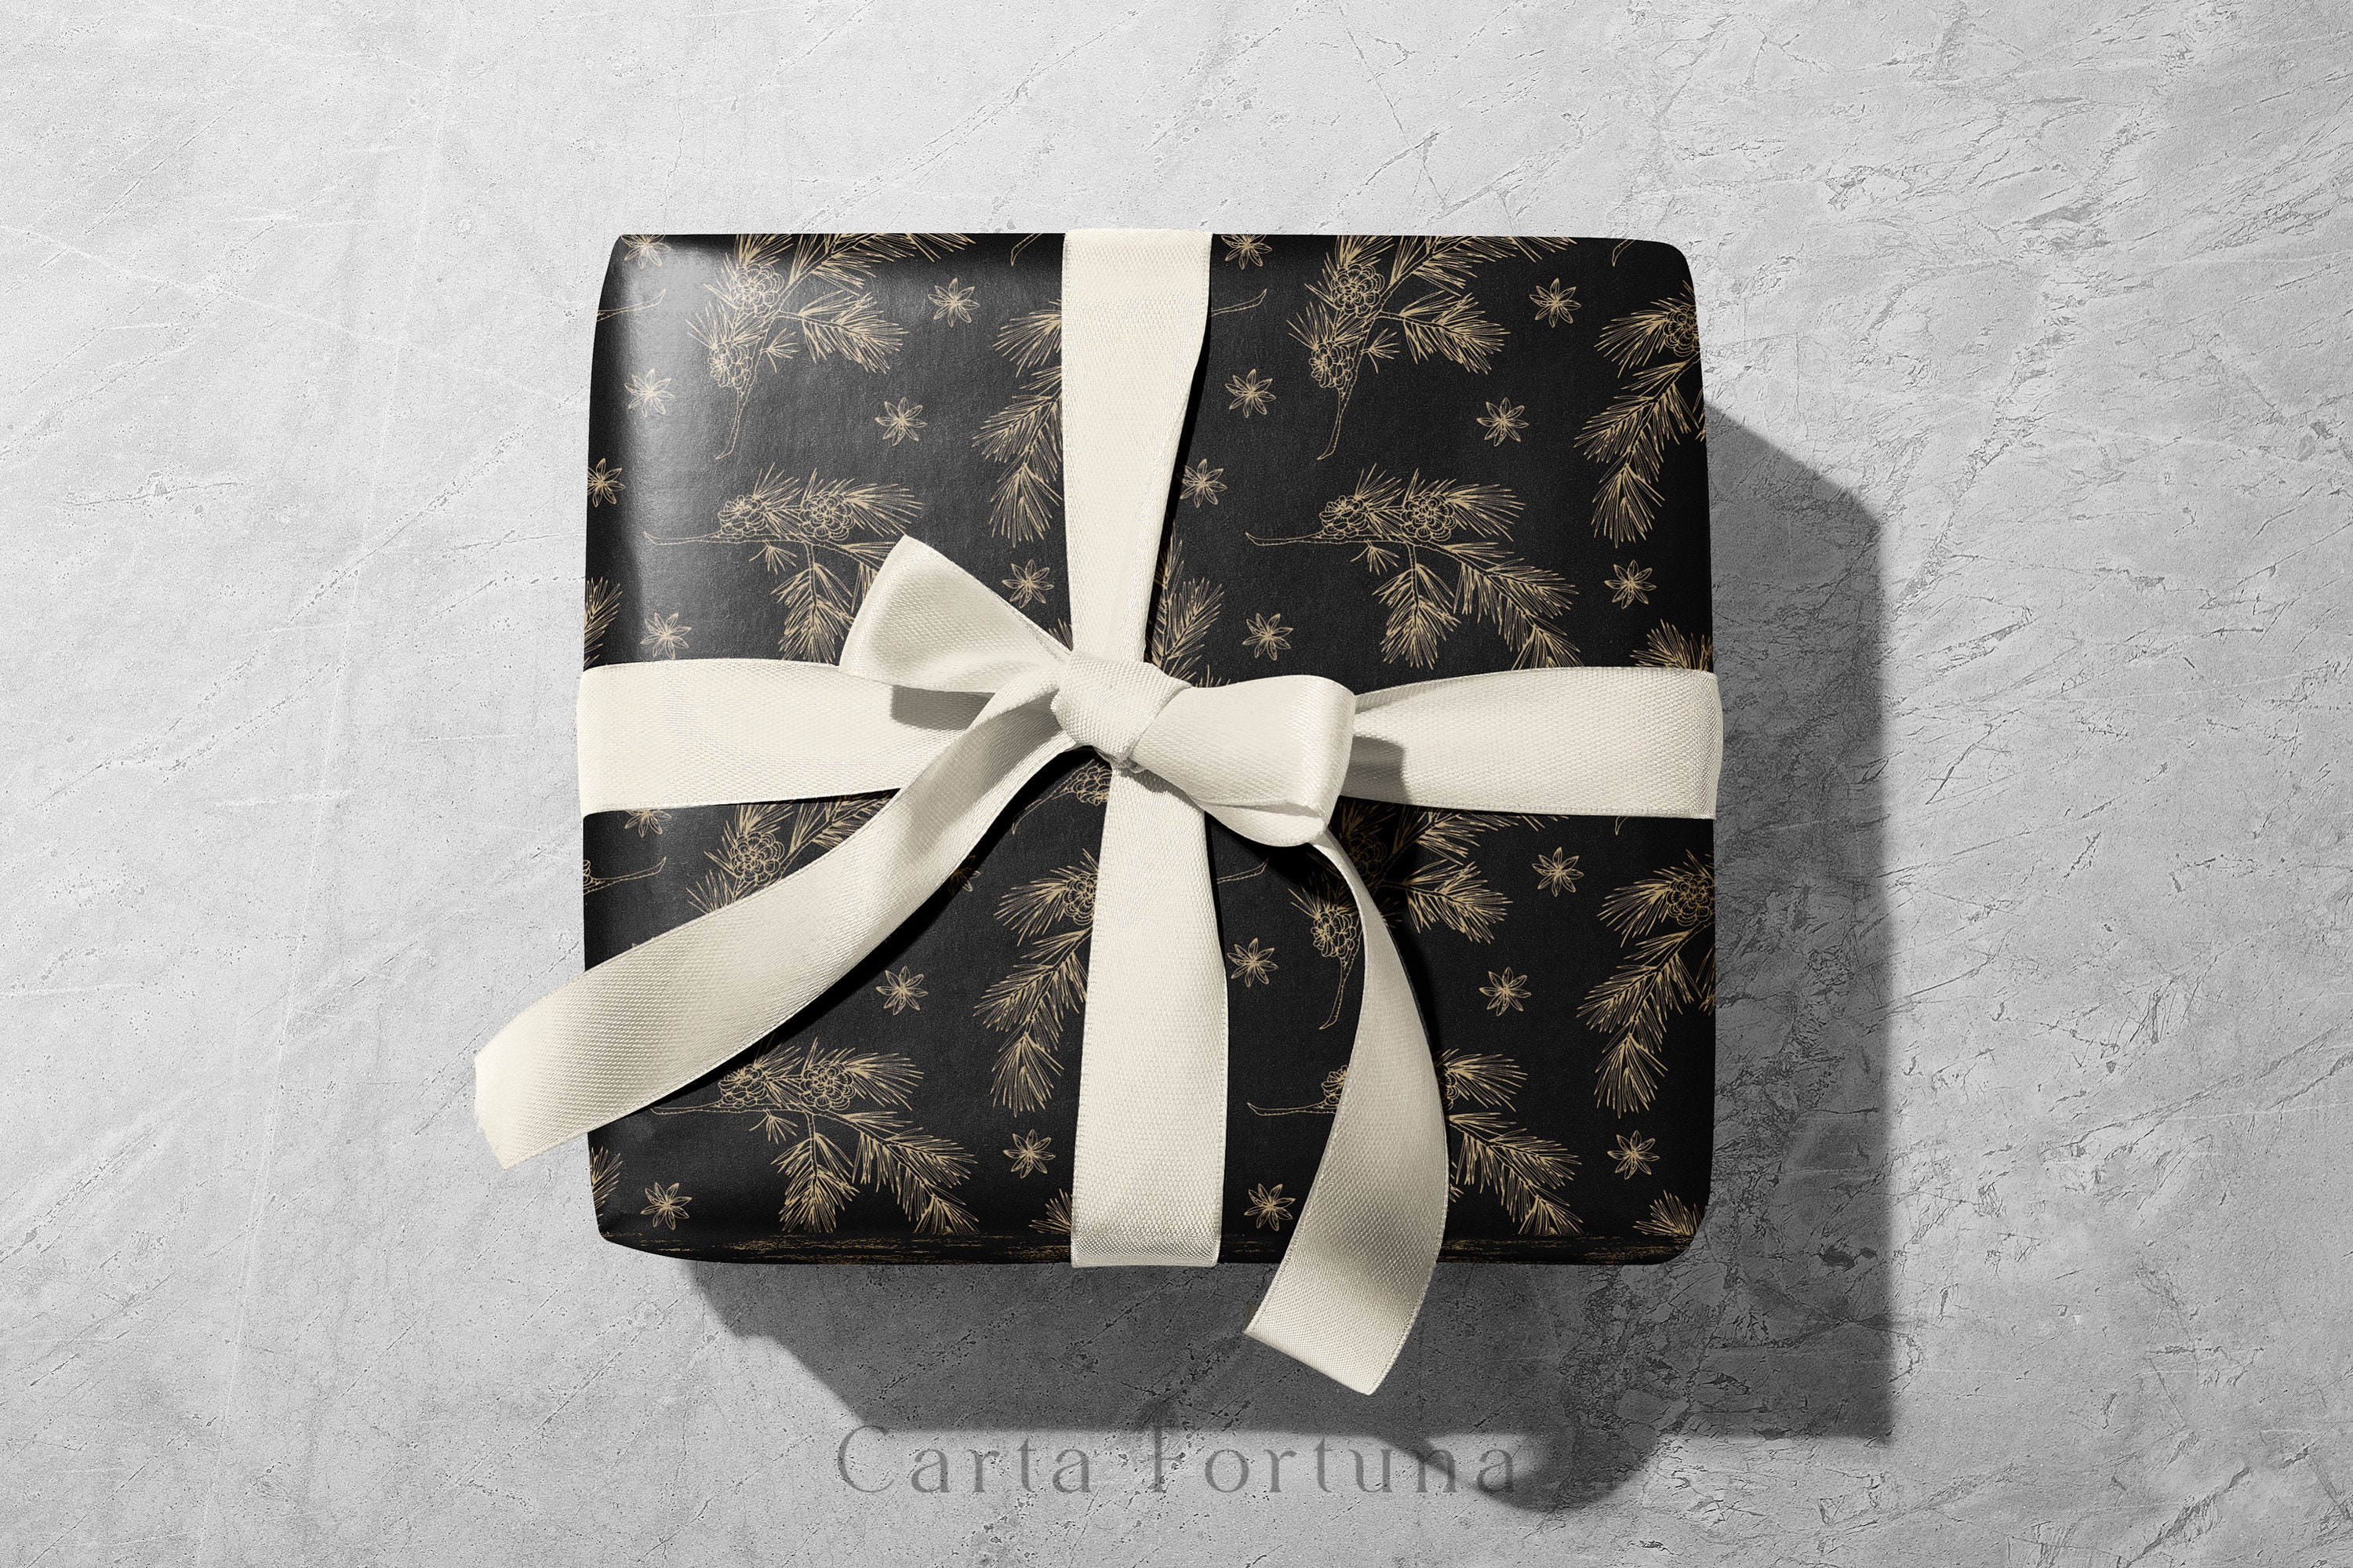 Black and Gold Elegant Christmas Wrapping Paper